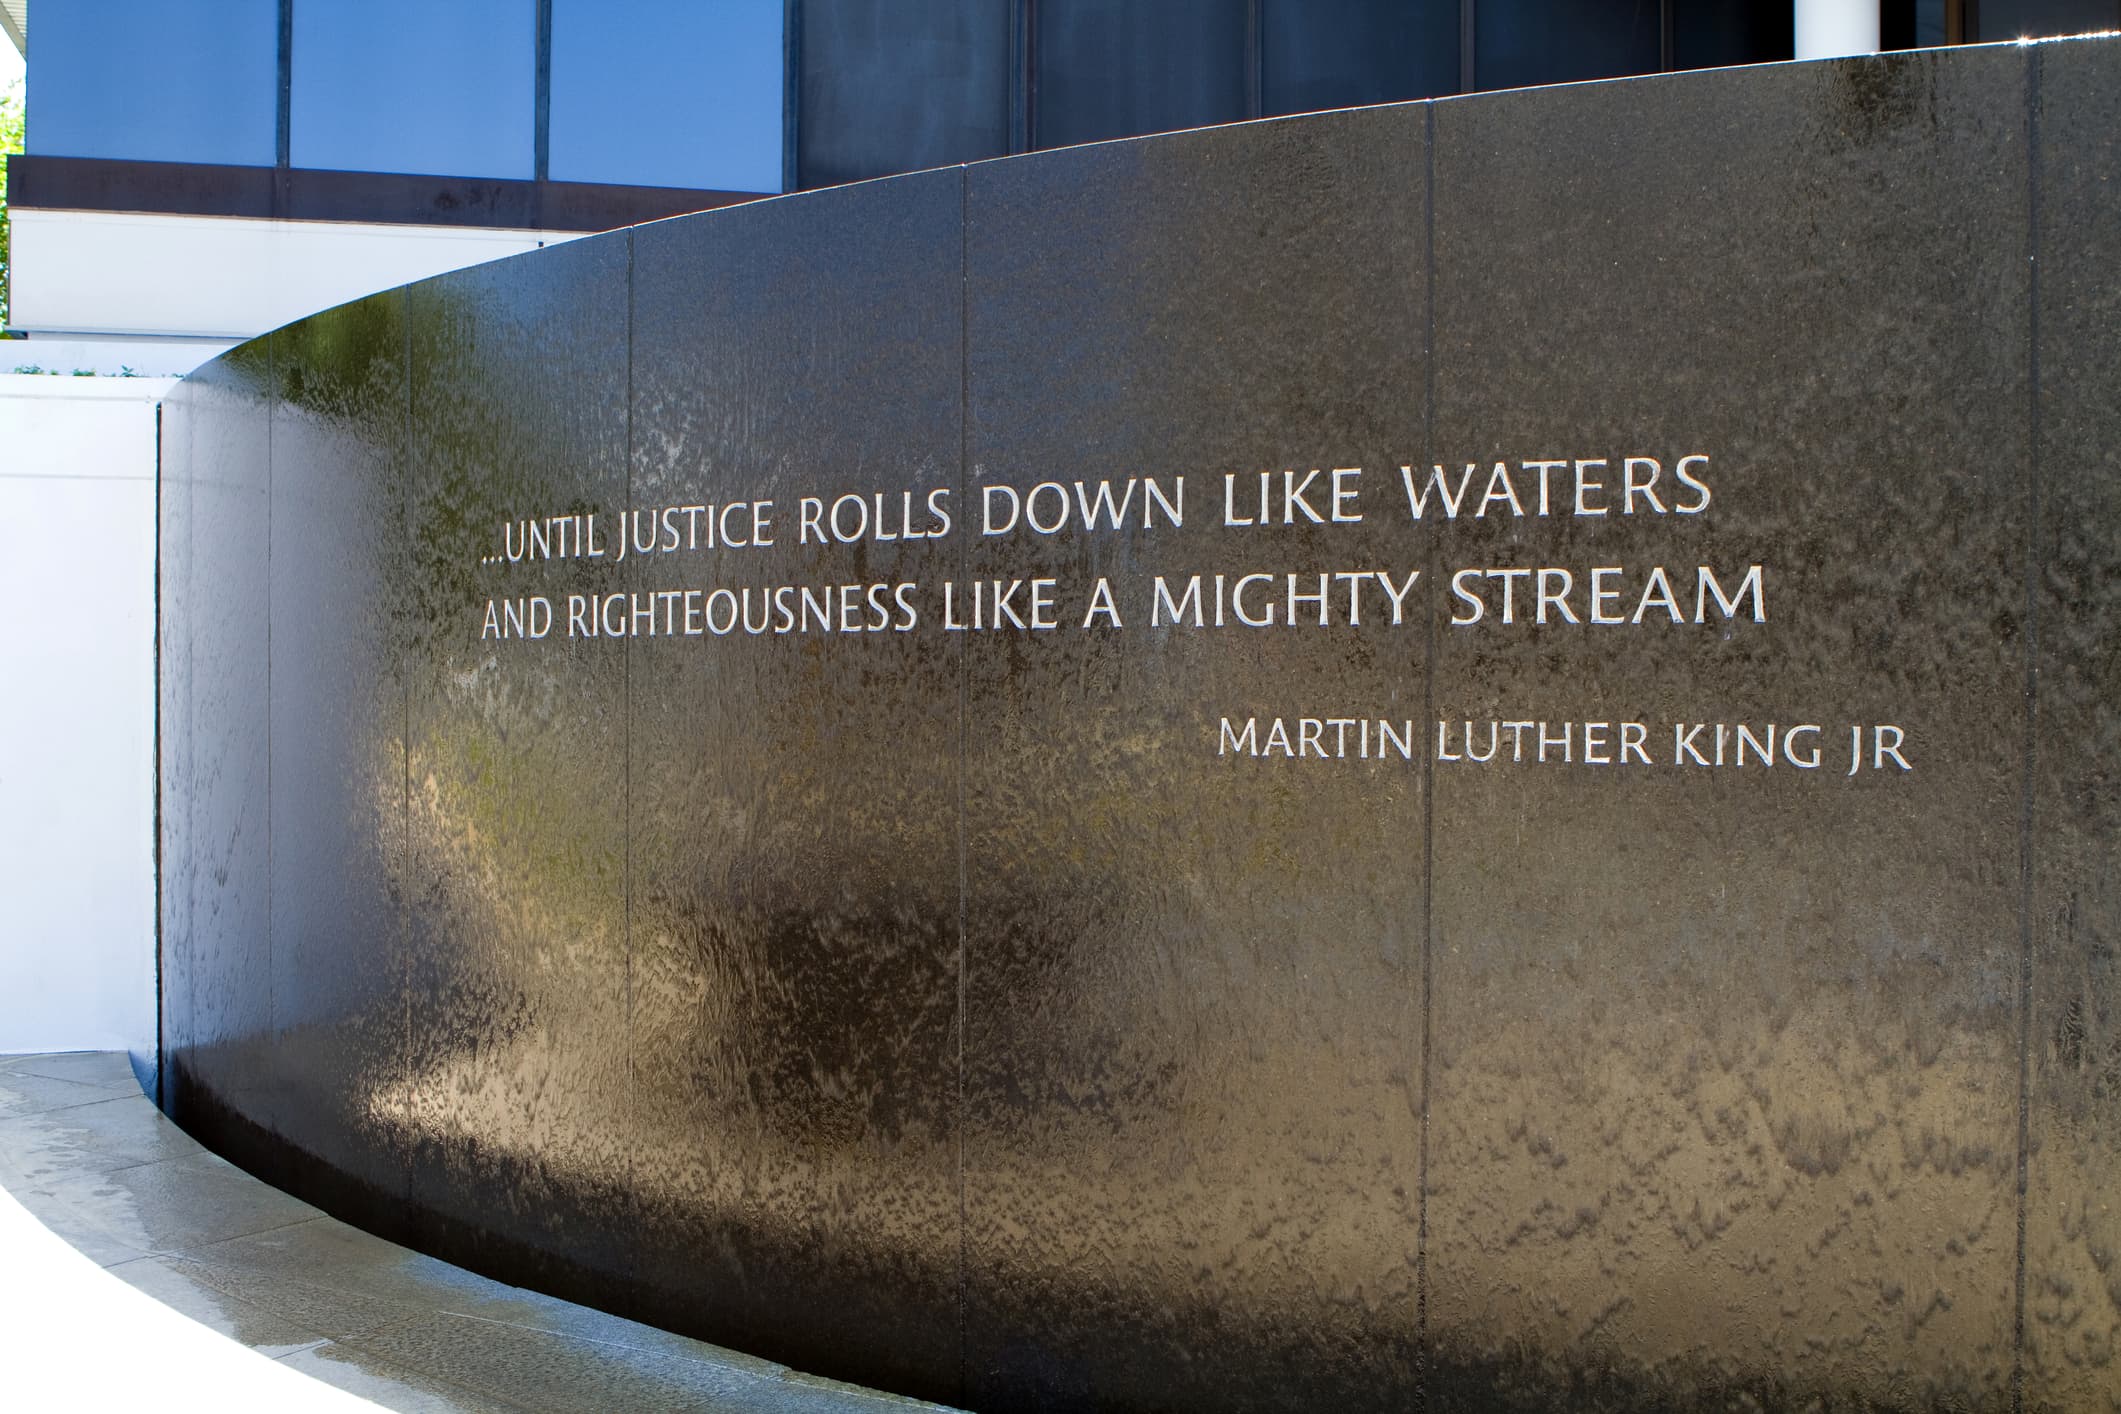 A view of the Civil Rights Memorial in Montgomery, Alabama, with a quote from Martin Luther King Jr.